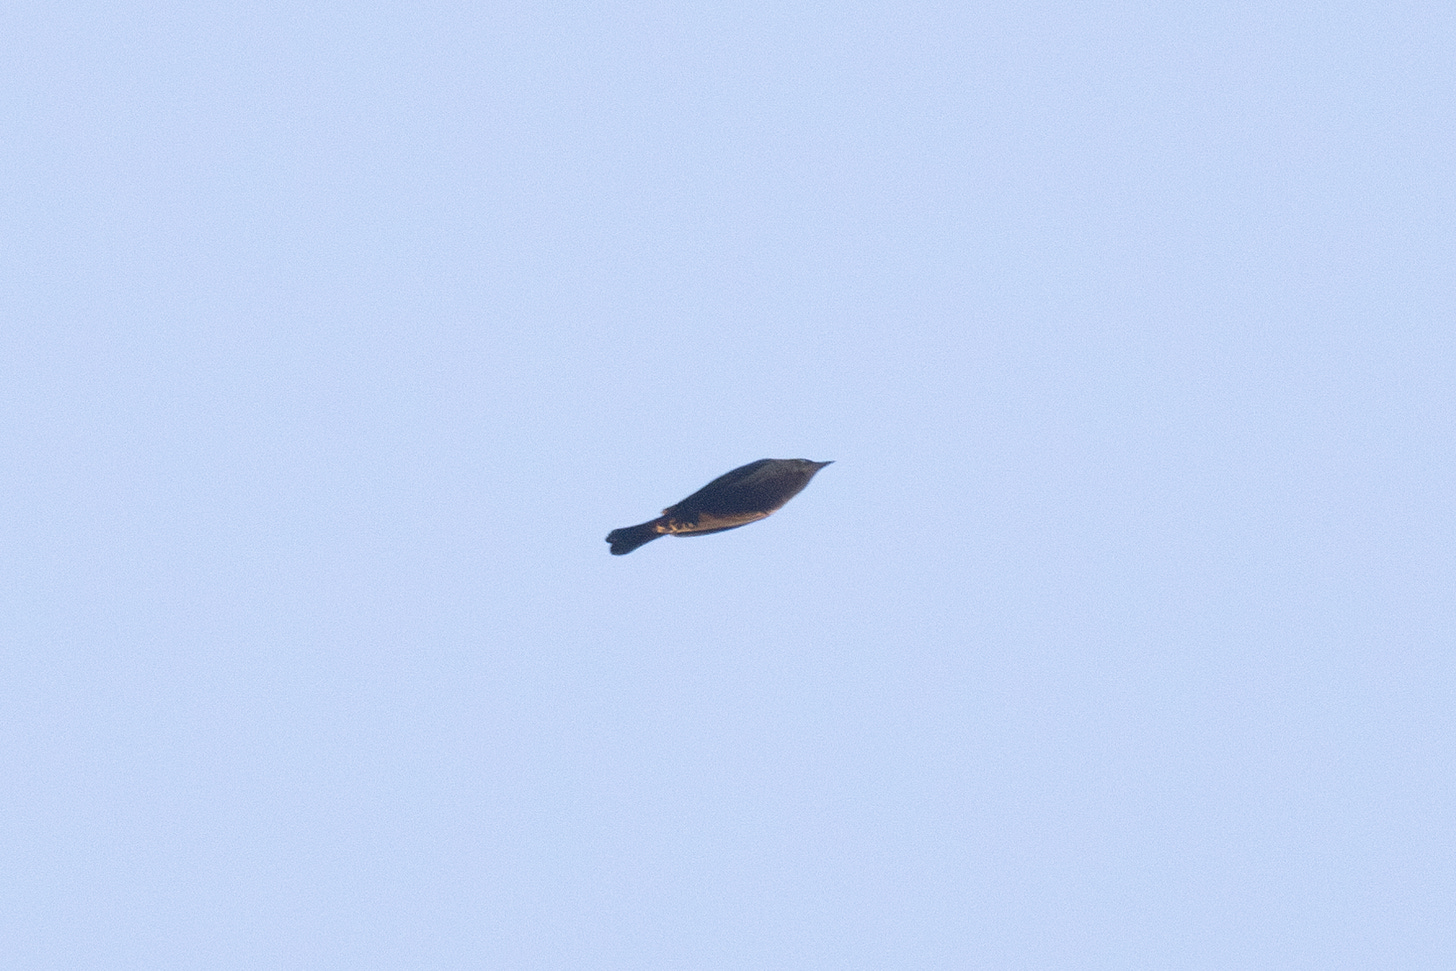 a single bird flying against a clear blue sky. the bird is rust-colored and has pale eyes.